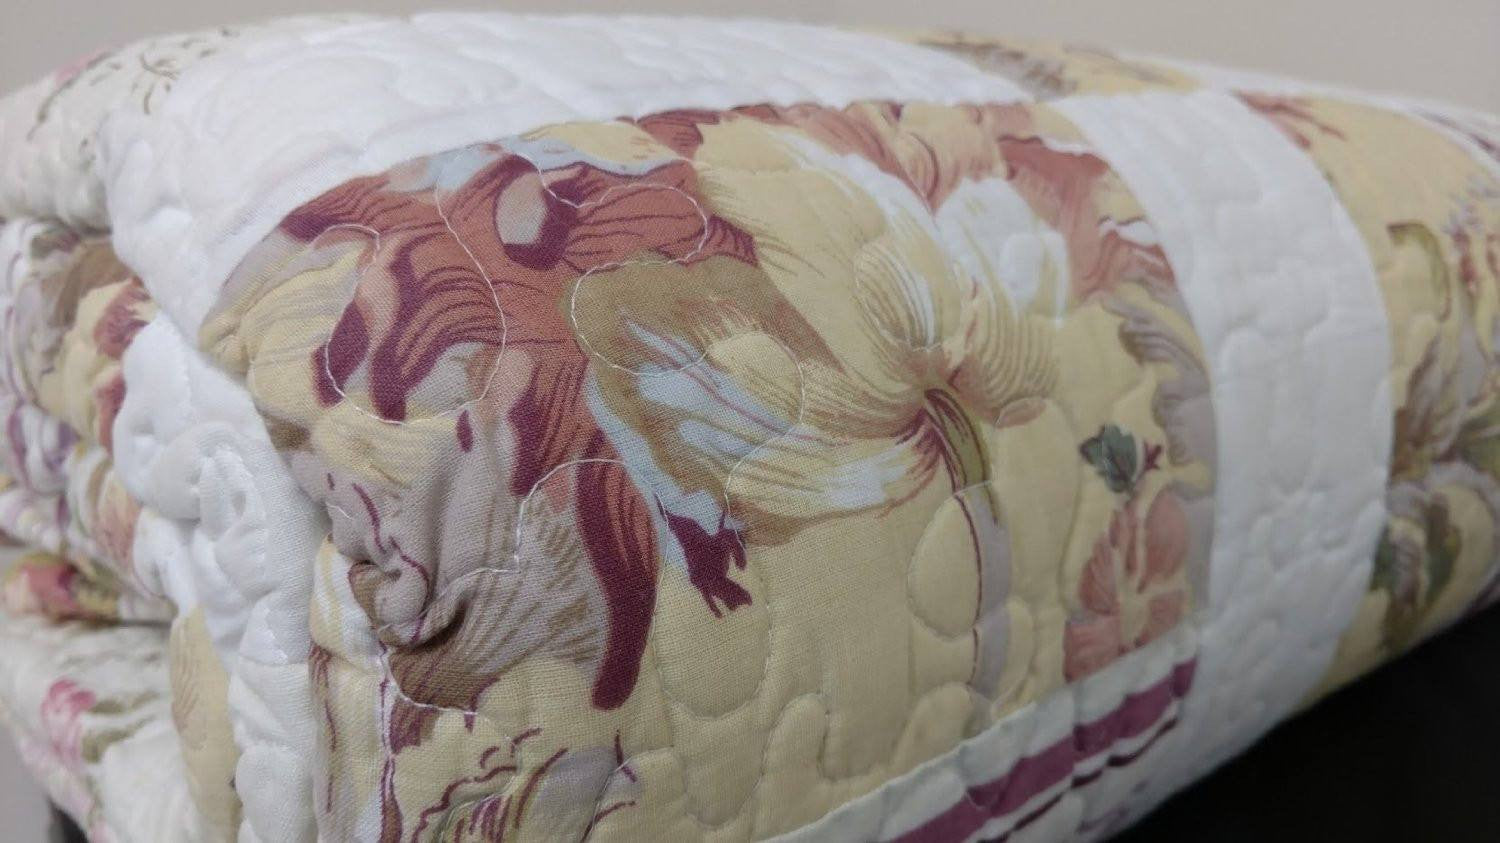 Classic Floral Blossoming Reversible Real Patchwork 100% Cotton Quilted Bedspread Set - Twin Size (DXJ103112) - Stores Basement - Discount Bedding